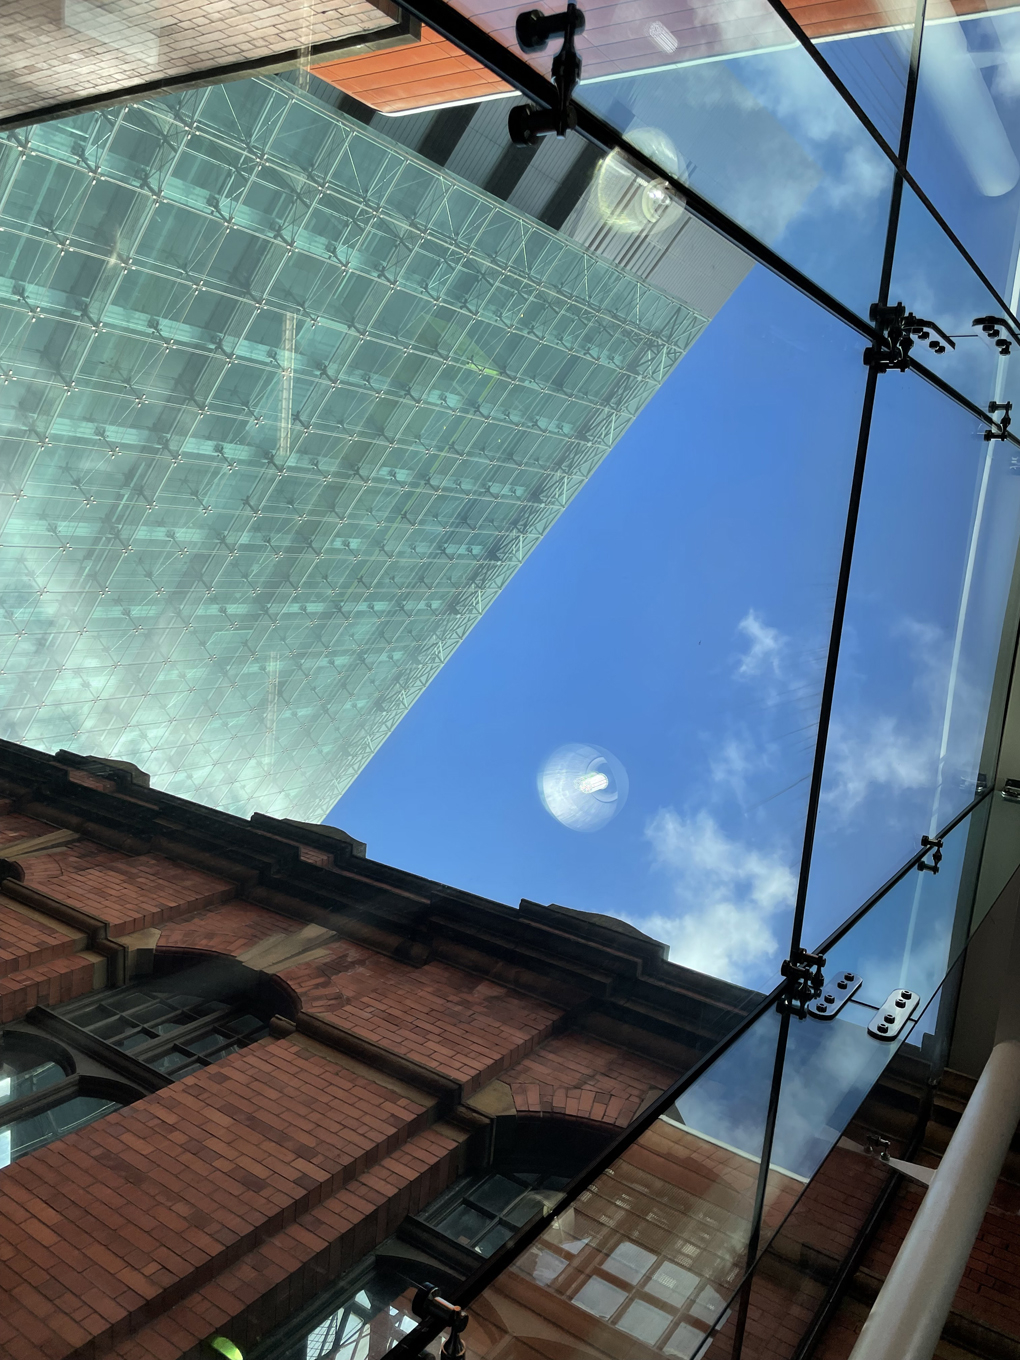 Picture of the sky through the window of a brick and glass building